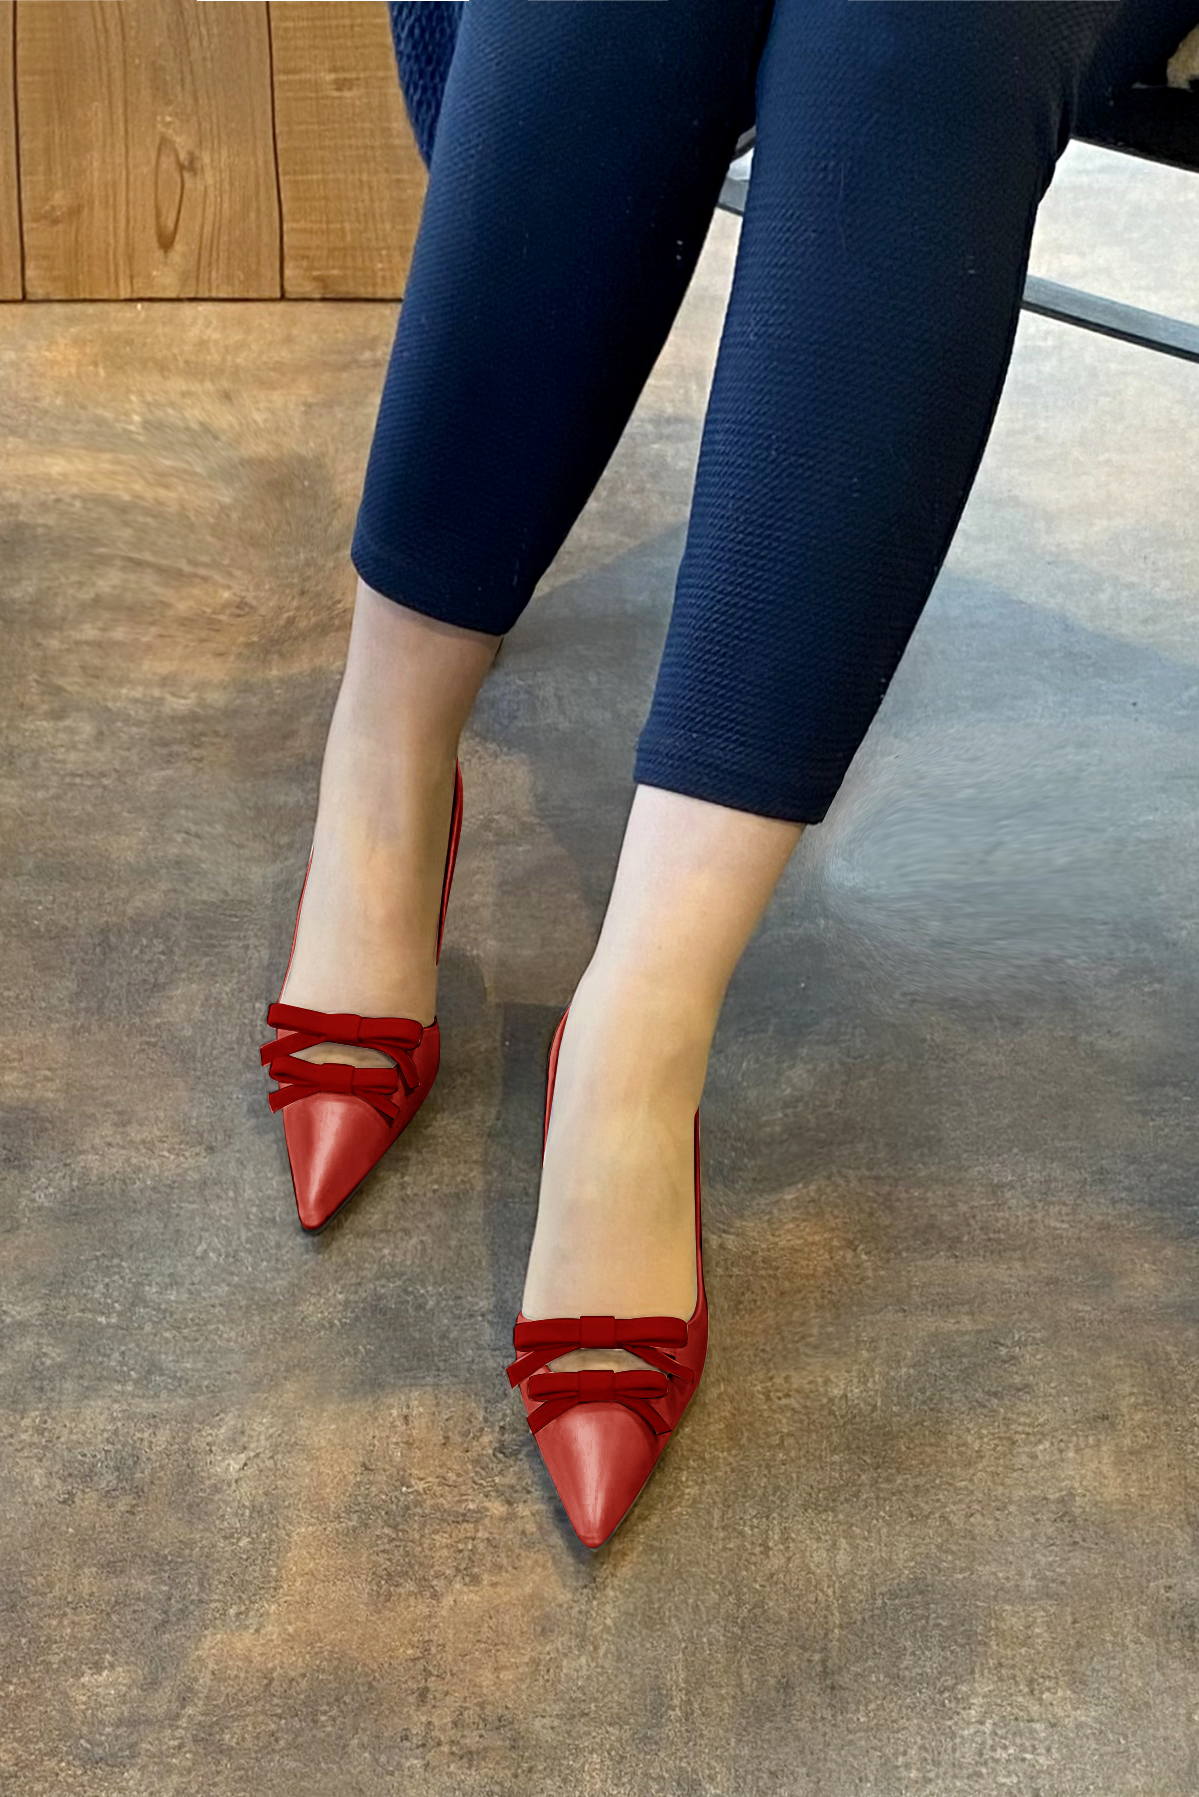 Cardinal red women's open back shoes, with a knot. Pointed toe. High slim heel. Worn view - Florence KOOIJMAN